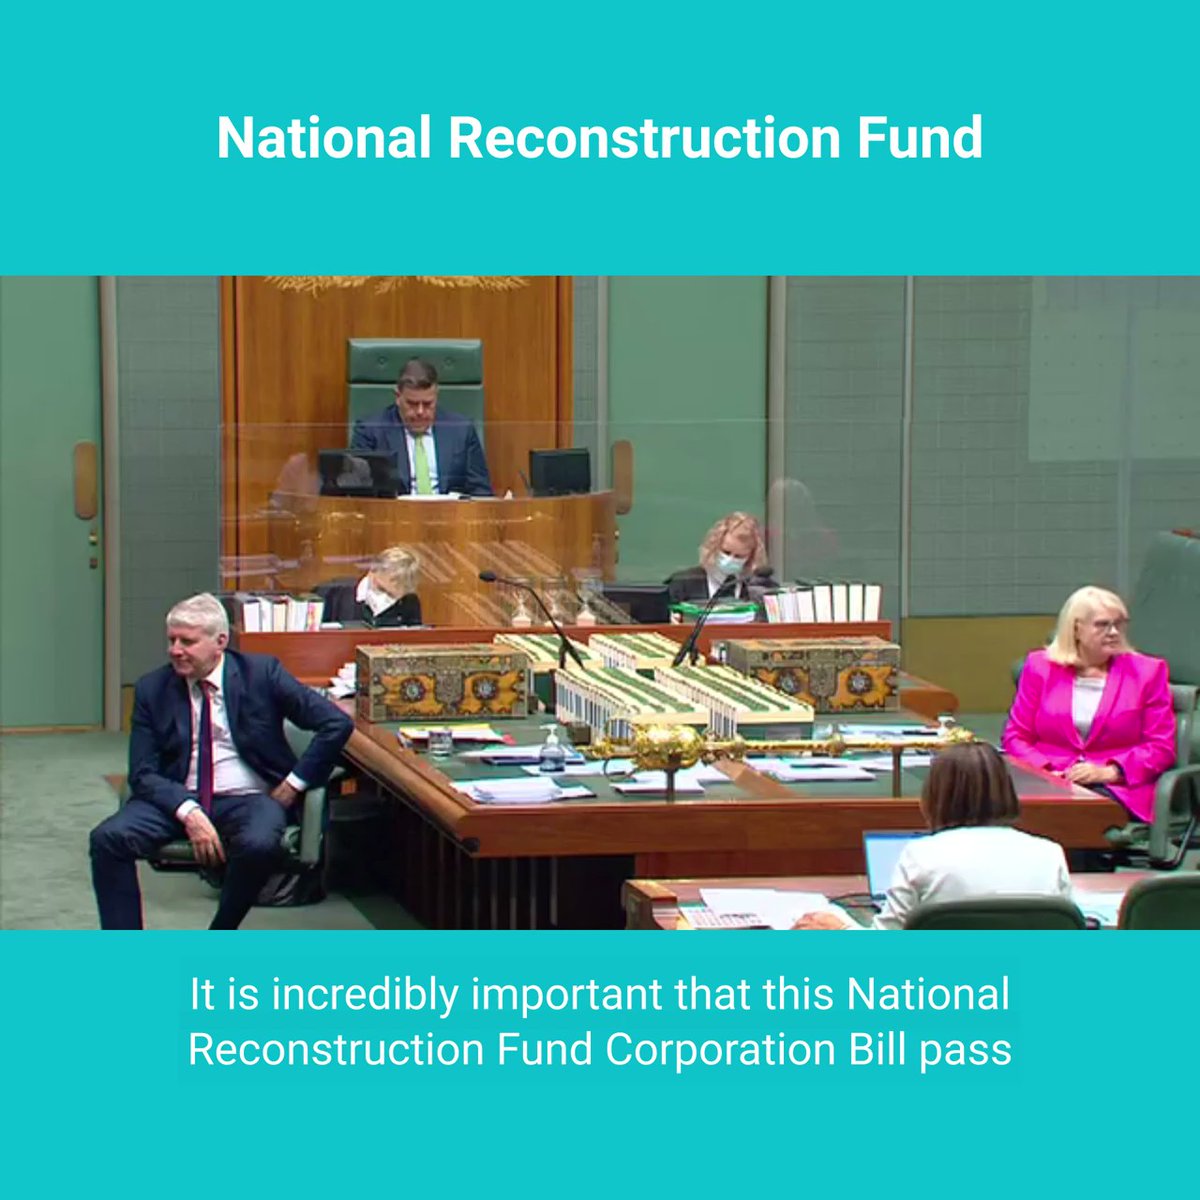 🌏 Zali Steggall MP: National Reconstruction Fund must support emerging tech & manufac…